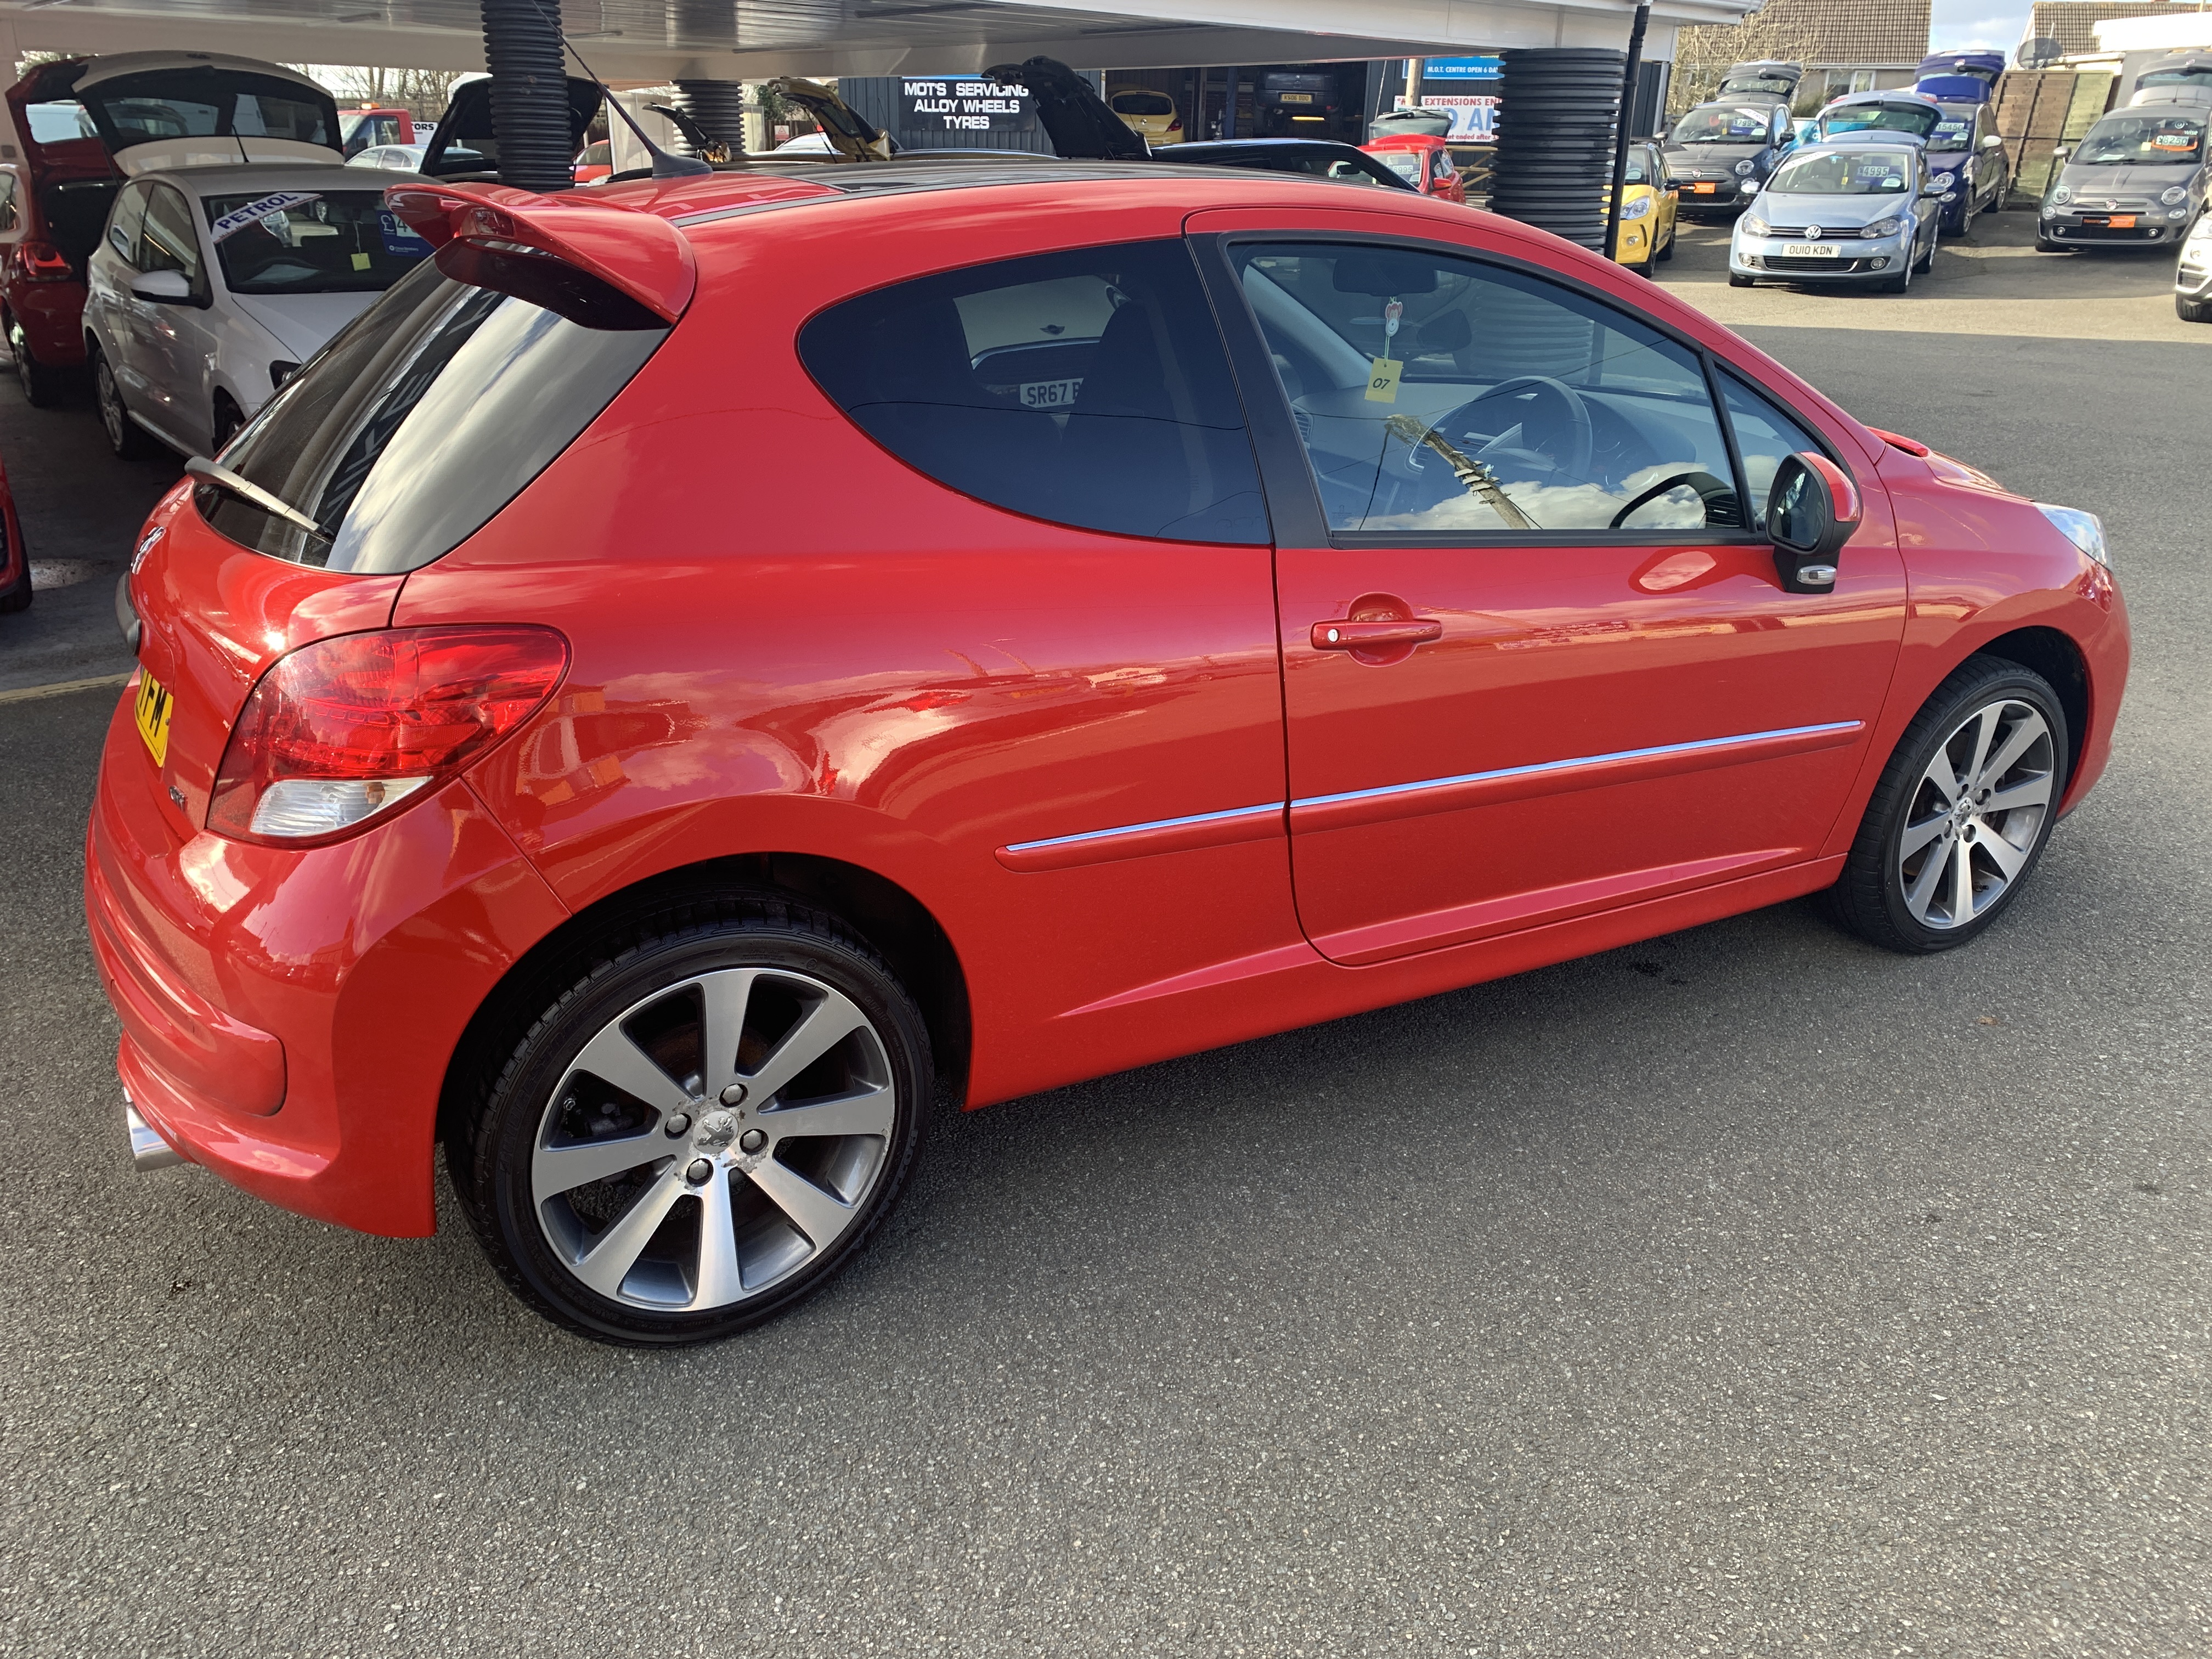 Peugeot 207 GTI 175 BHP for sale at Mike Howlin Motor Sales Pembrokeshire